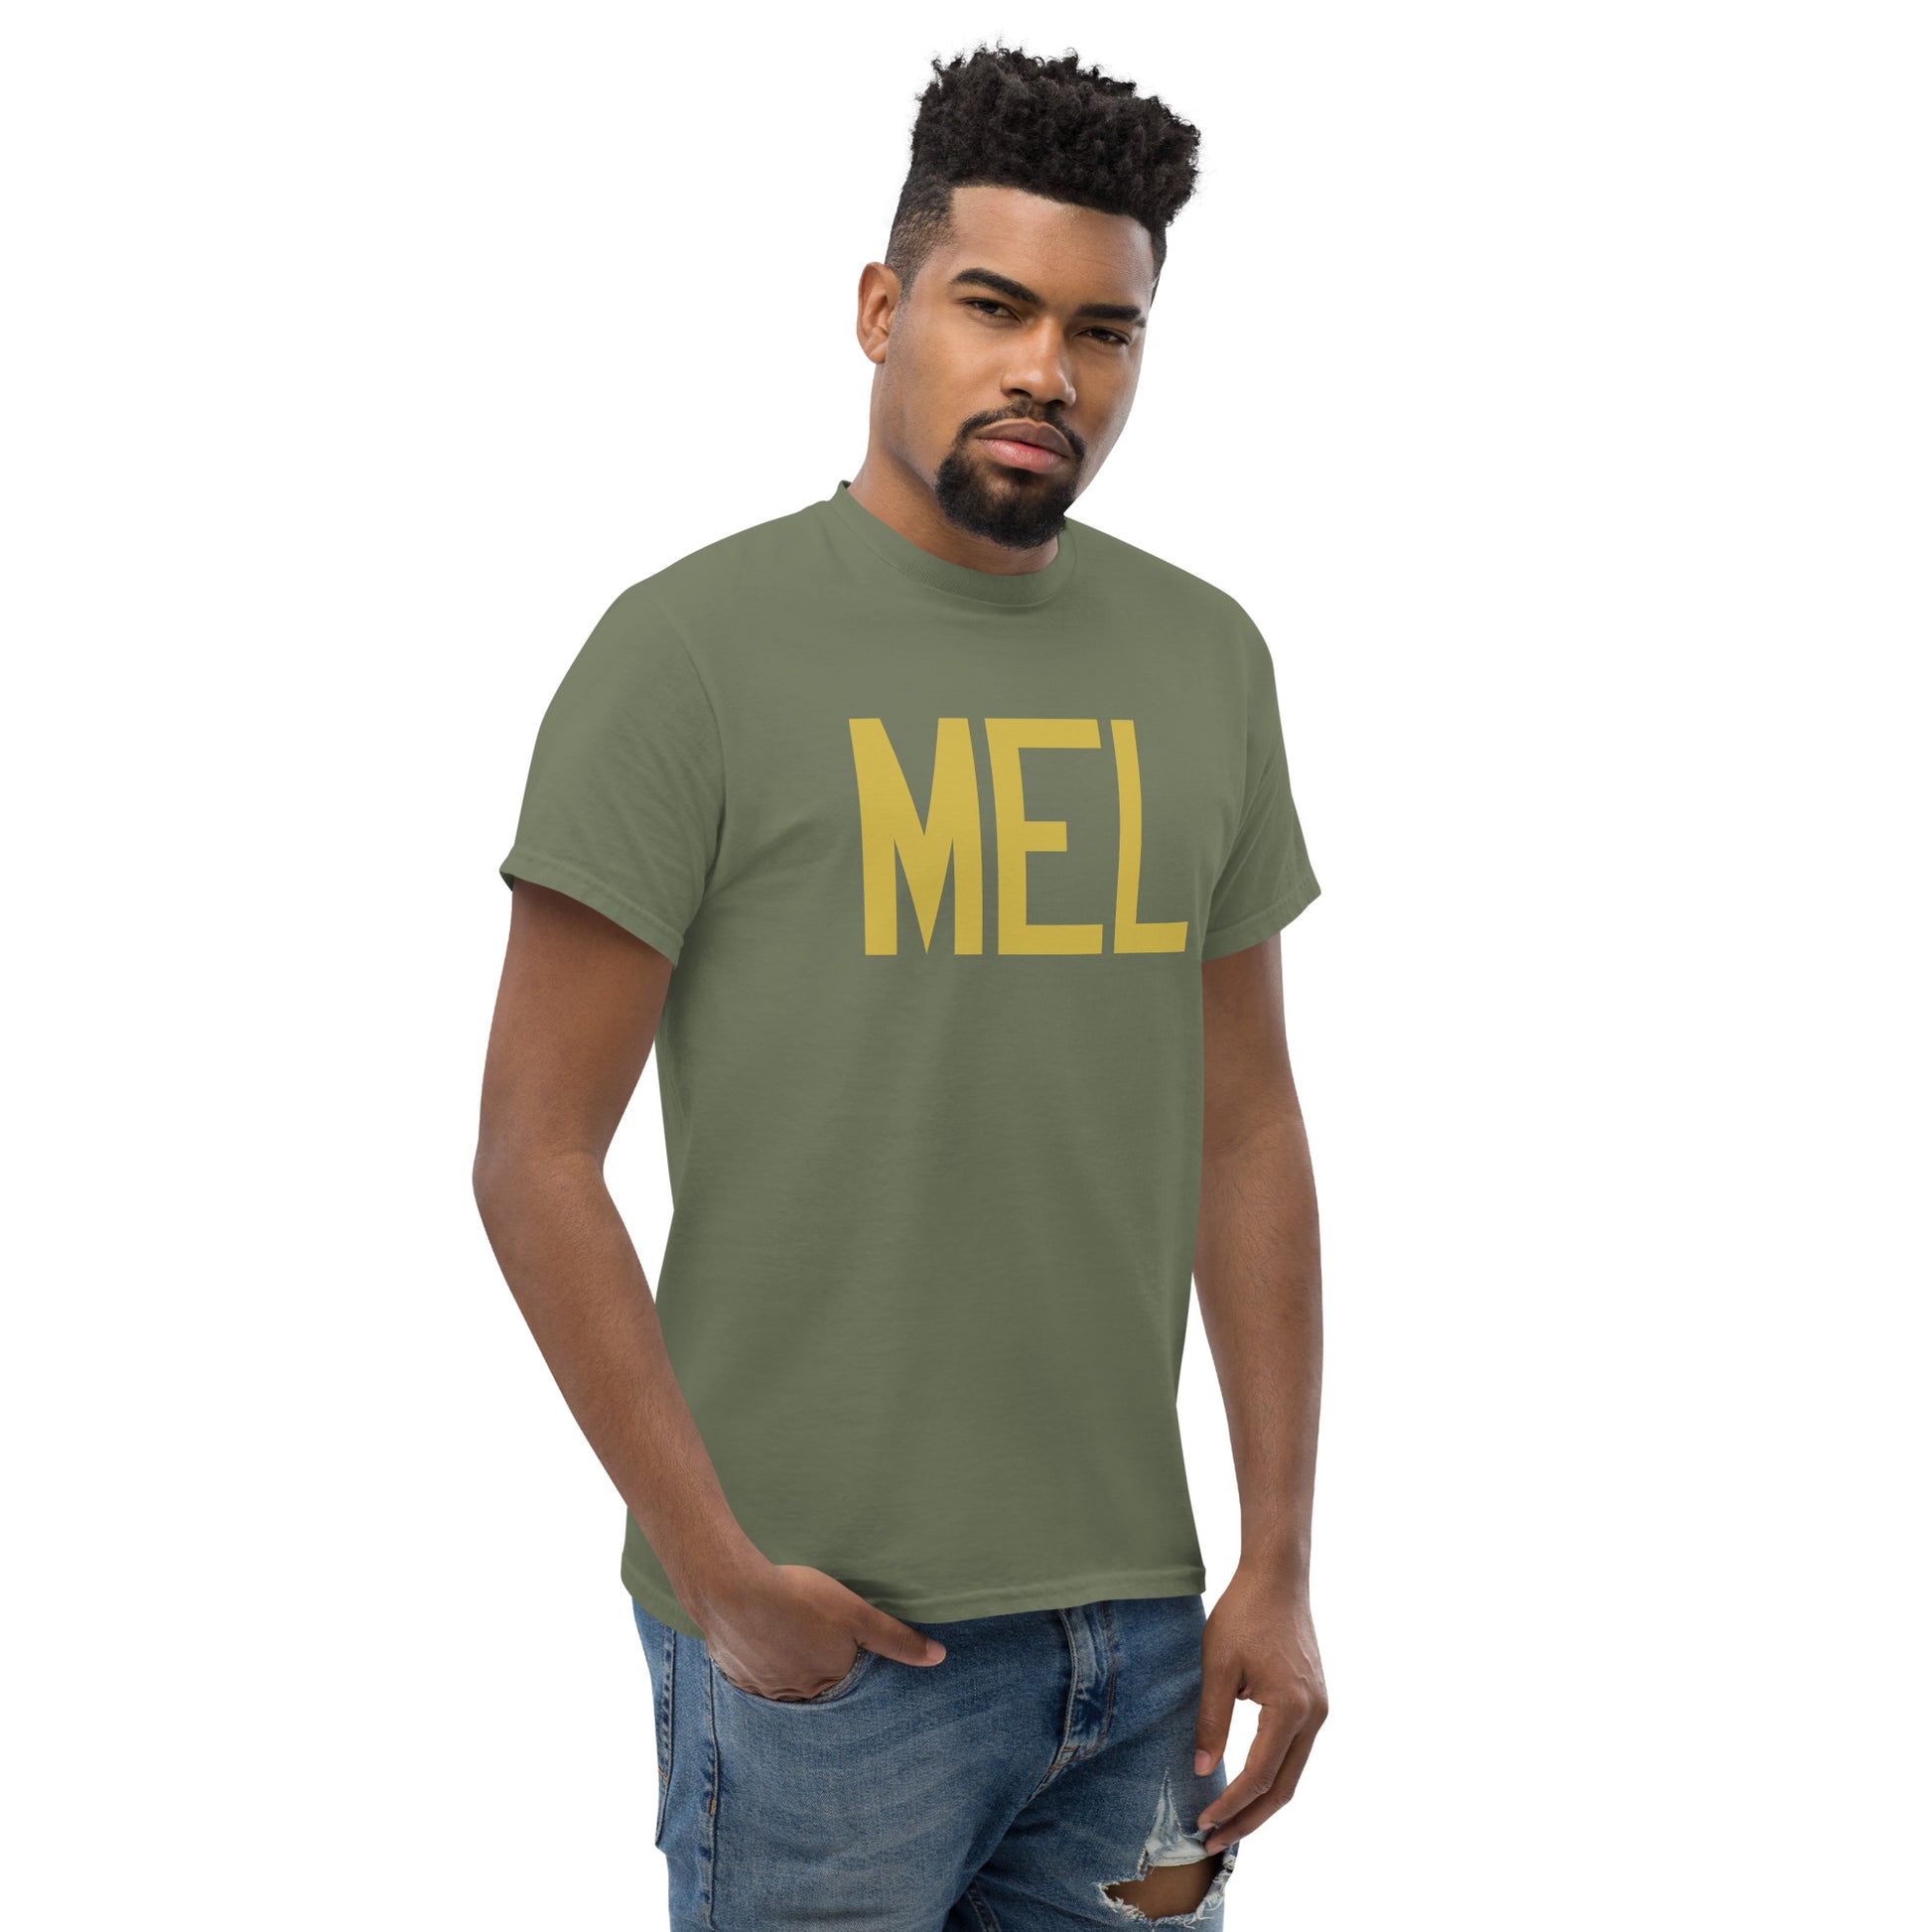 Aviation Enthusiast Men's Tee - Old Gold Graphic • MEL Melbourne • YHM Designs - Image 08